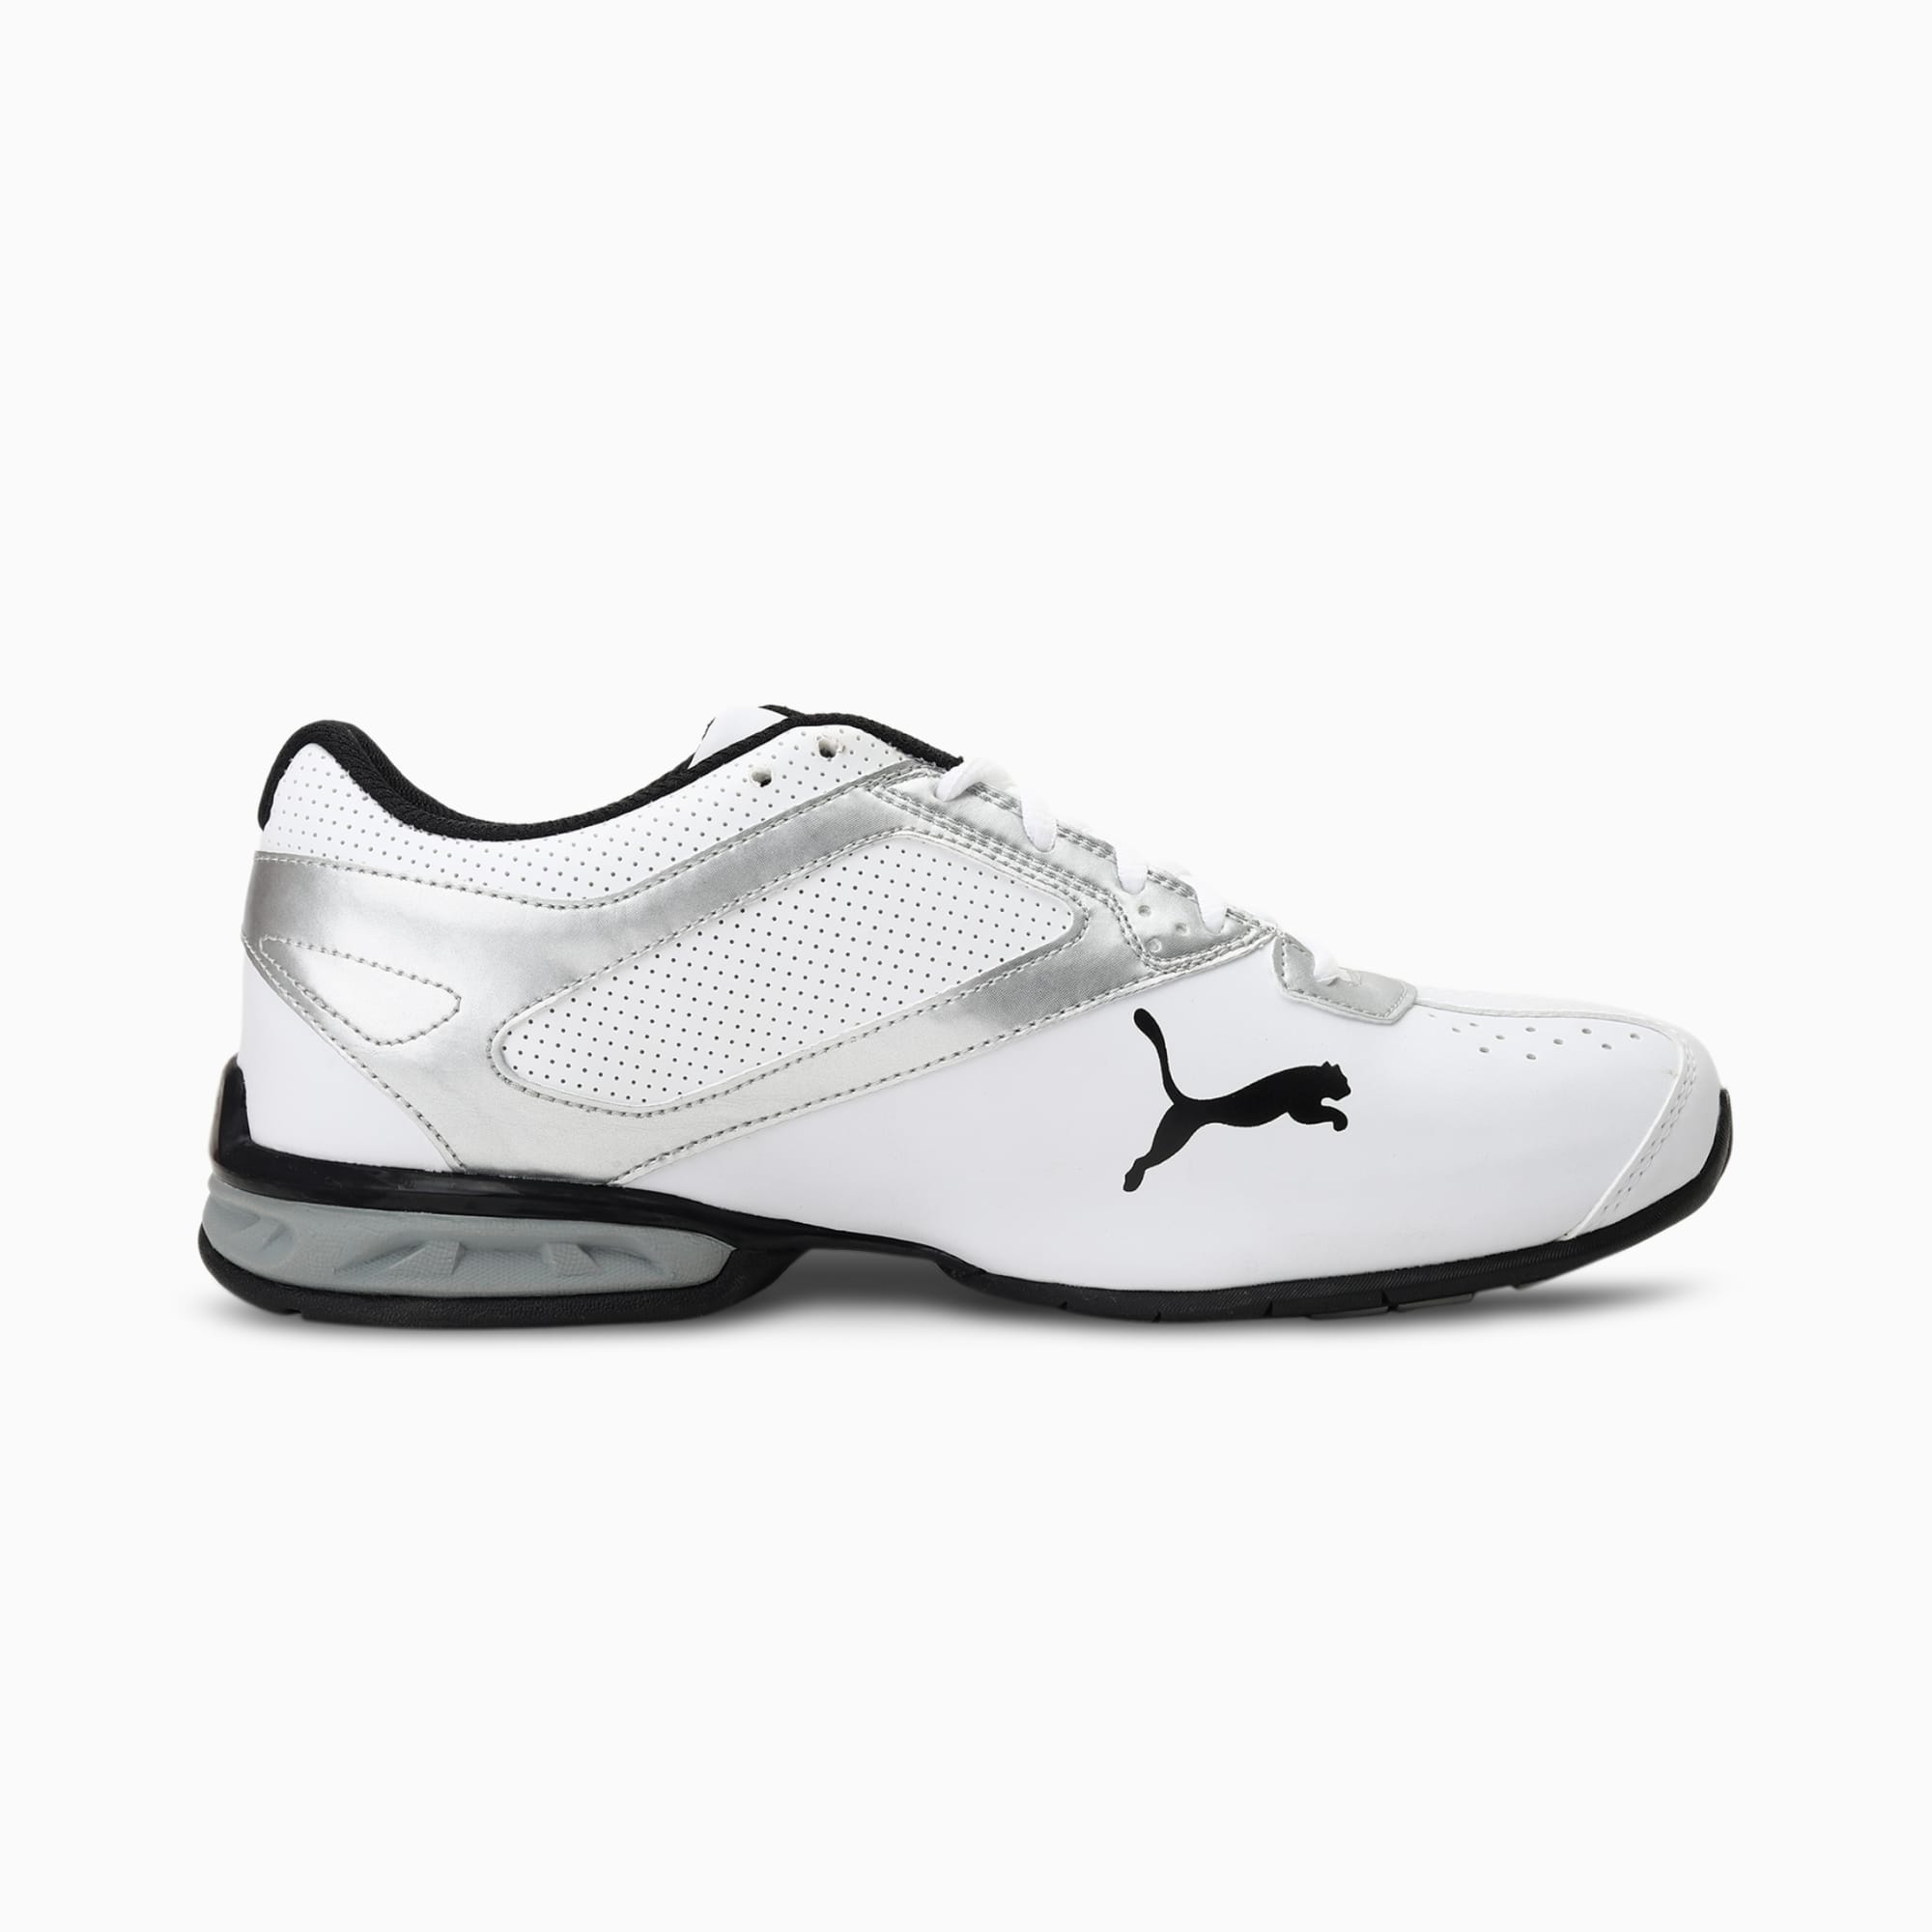 inference screen Specifically Tazon 6 FM Men's Shoes | PUMA